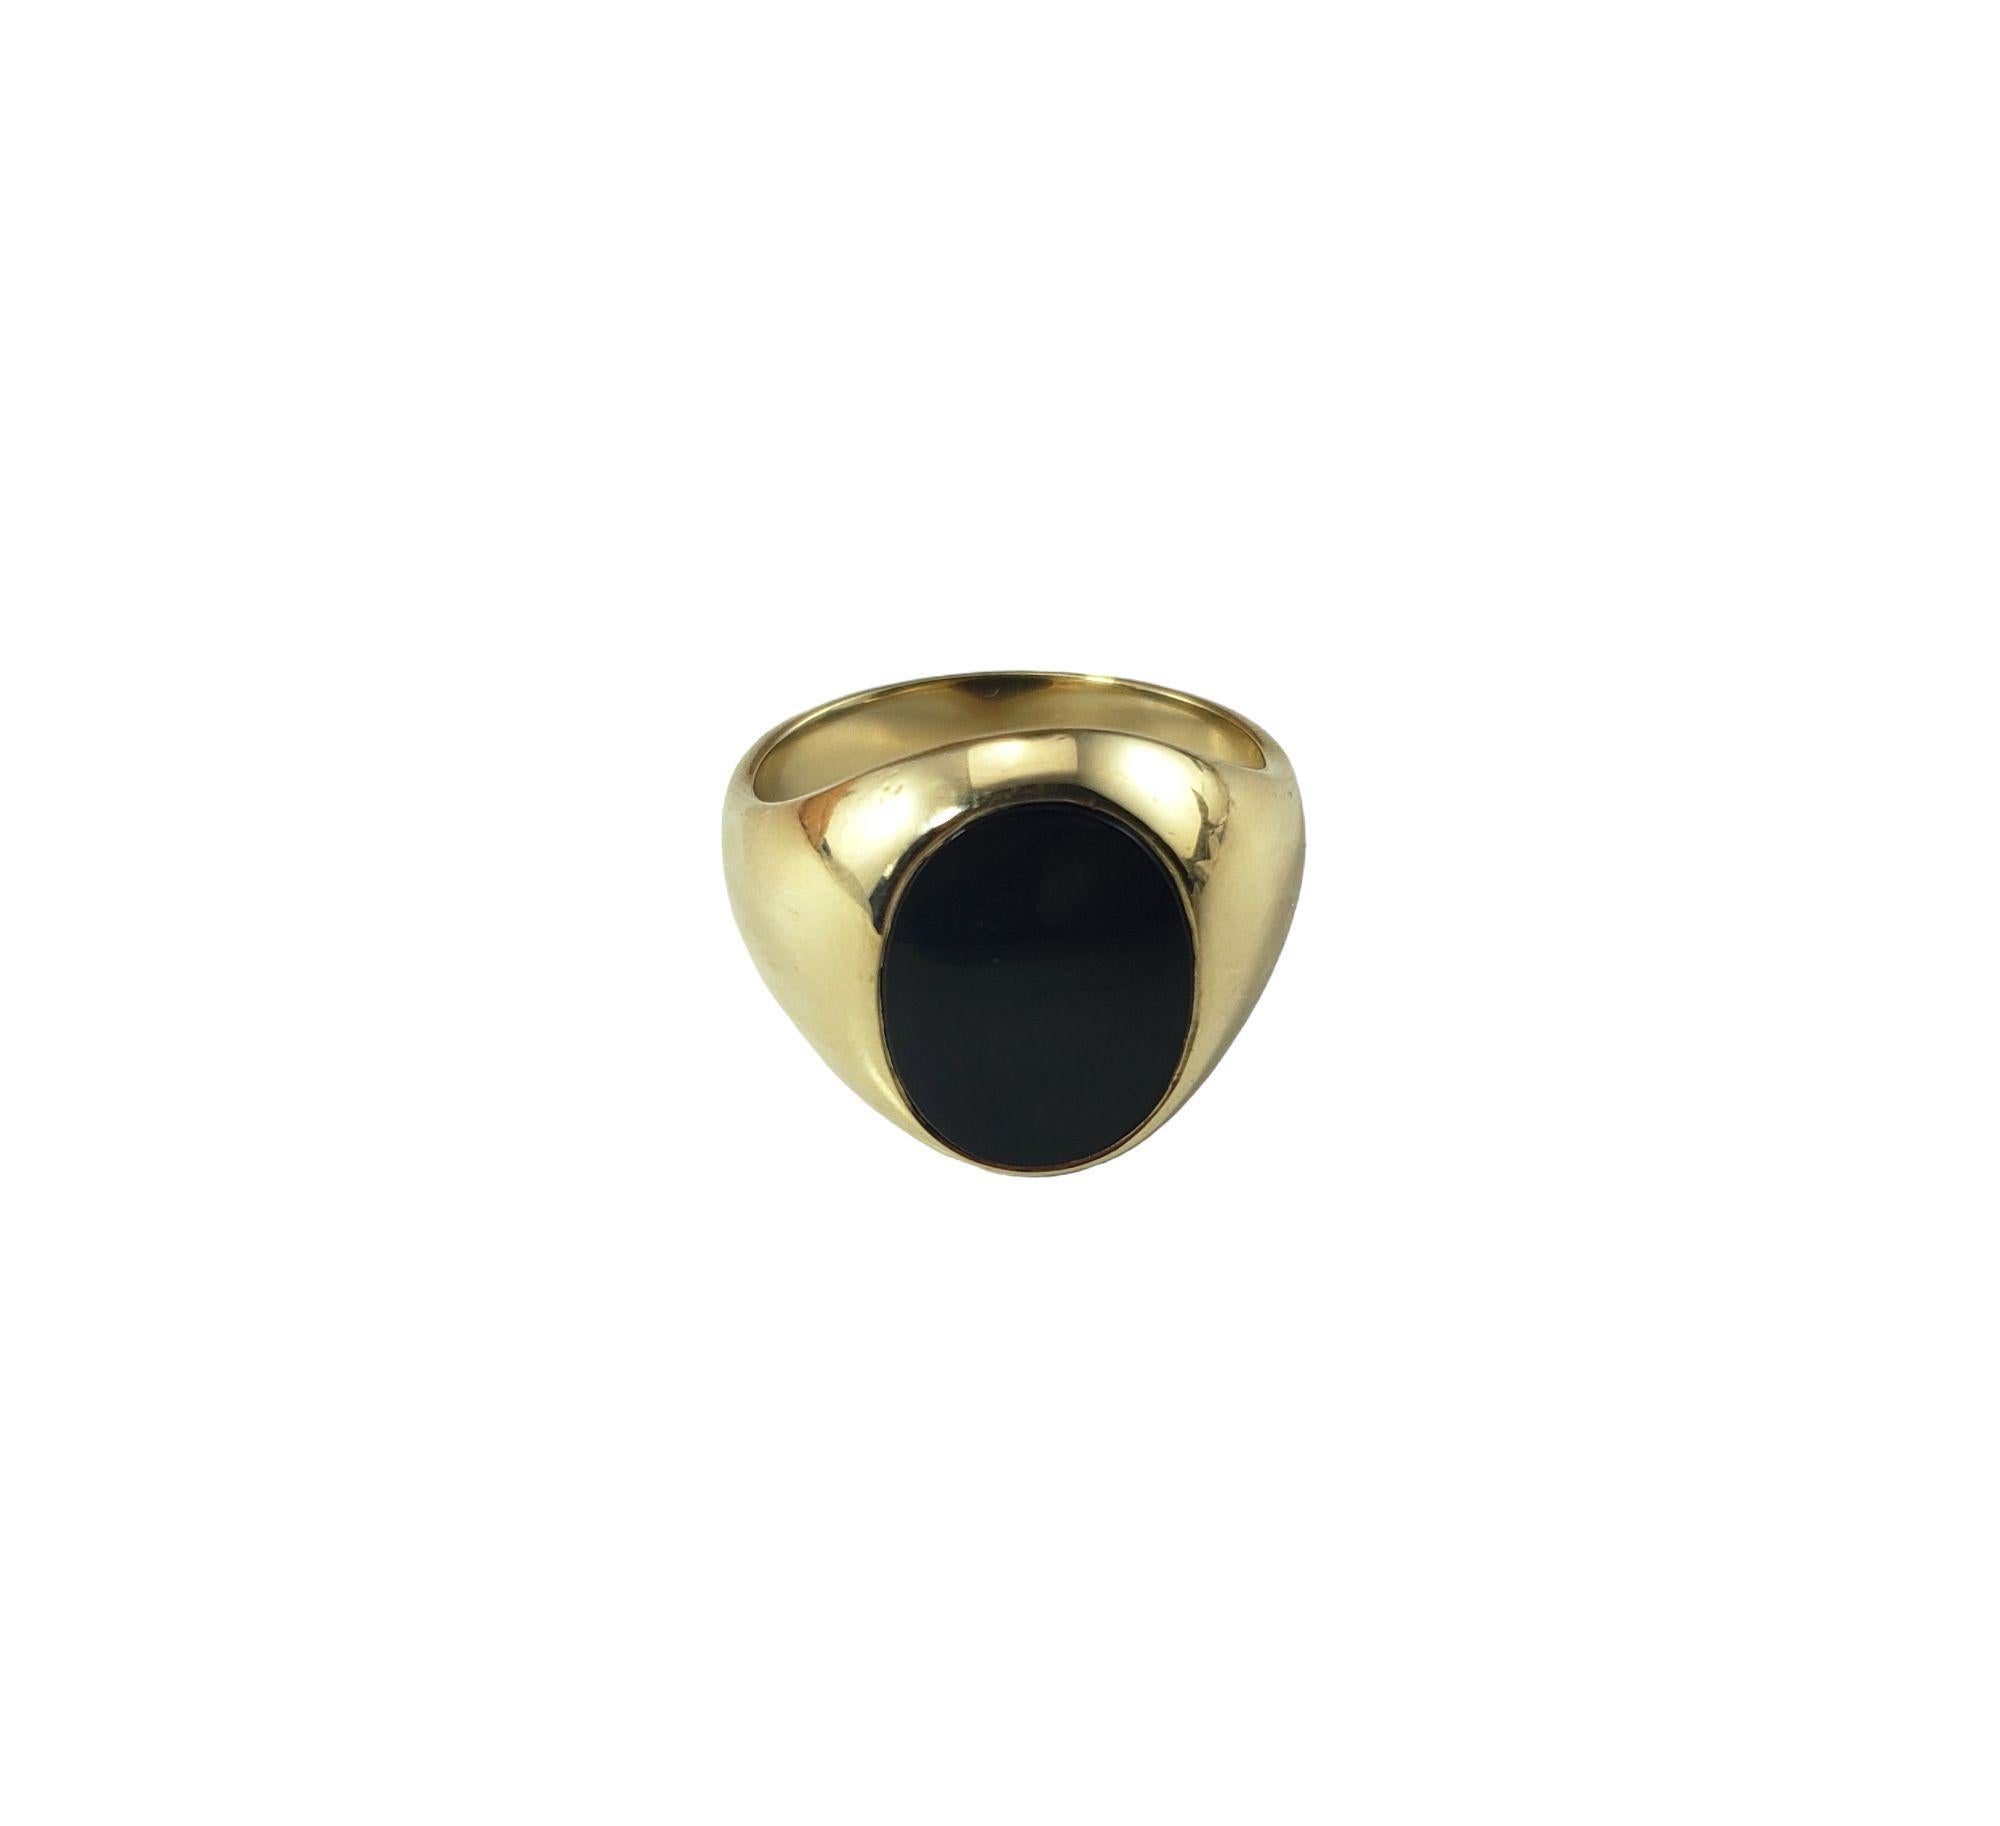 Tiffany & Co. 14 Karat Yellow Gold Black Onyx Signet Ring Size 10.25-

This elegant signet ring by Tiffany & Co. features black onyx set in beautifully detailed 14K yellow gold. Width: 19 mm. Shank: 5 mm.

Ring Size: 10.25

Weight: 8.0 dwt.